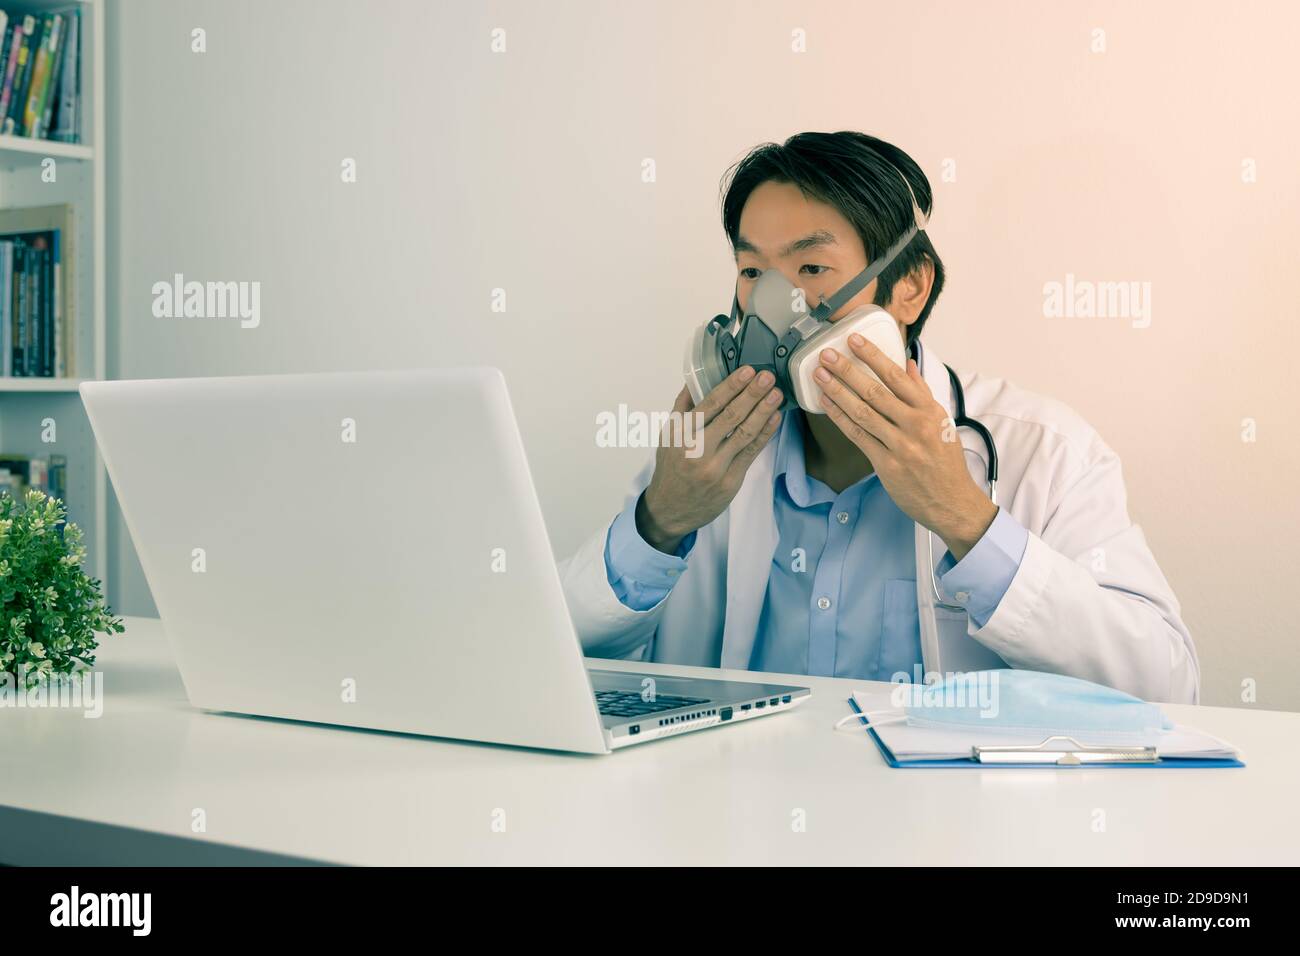 Young Asian Doctor Man in Lab Coat or Gown with Stethoscope Demonstrate Filter Mask Using with Patient Via Laptop Computer in Office in Vintage Tone Stock Photo